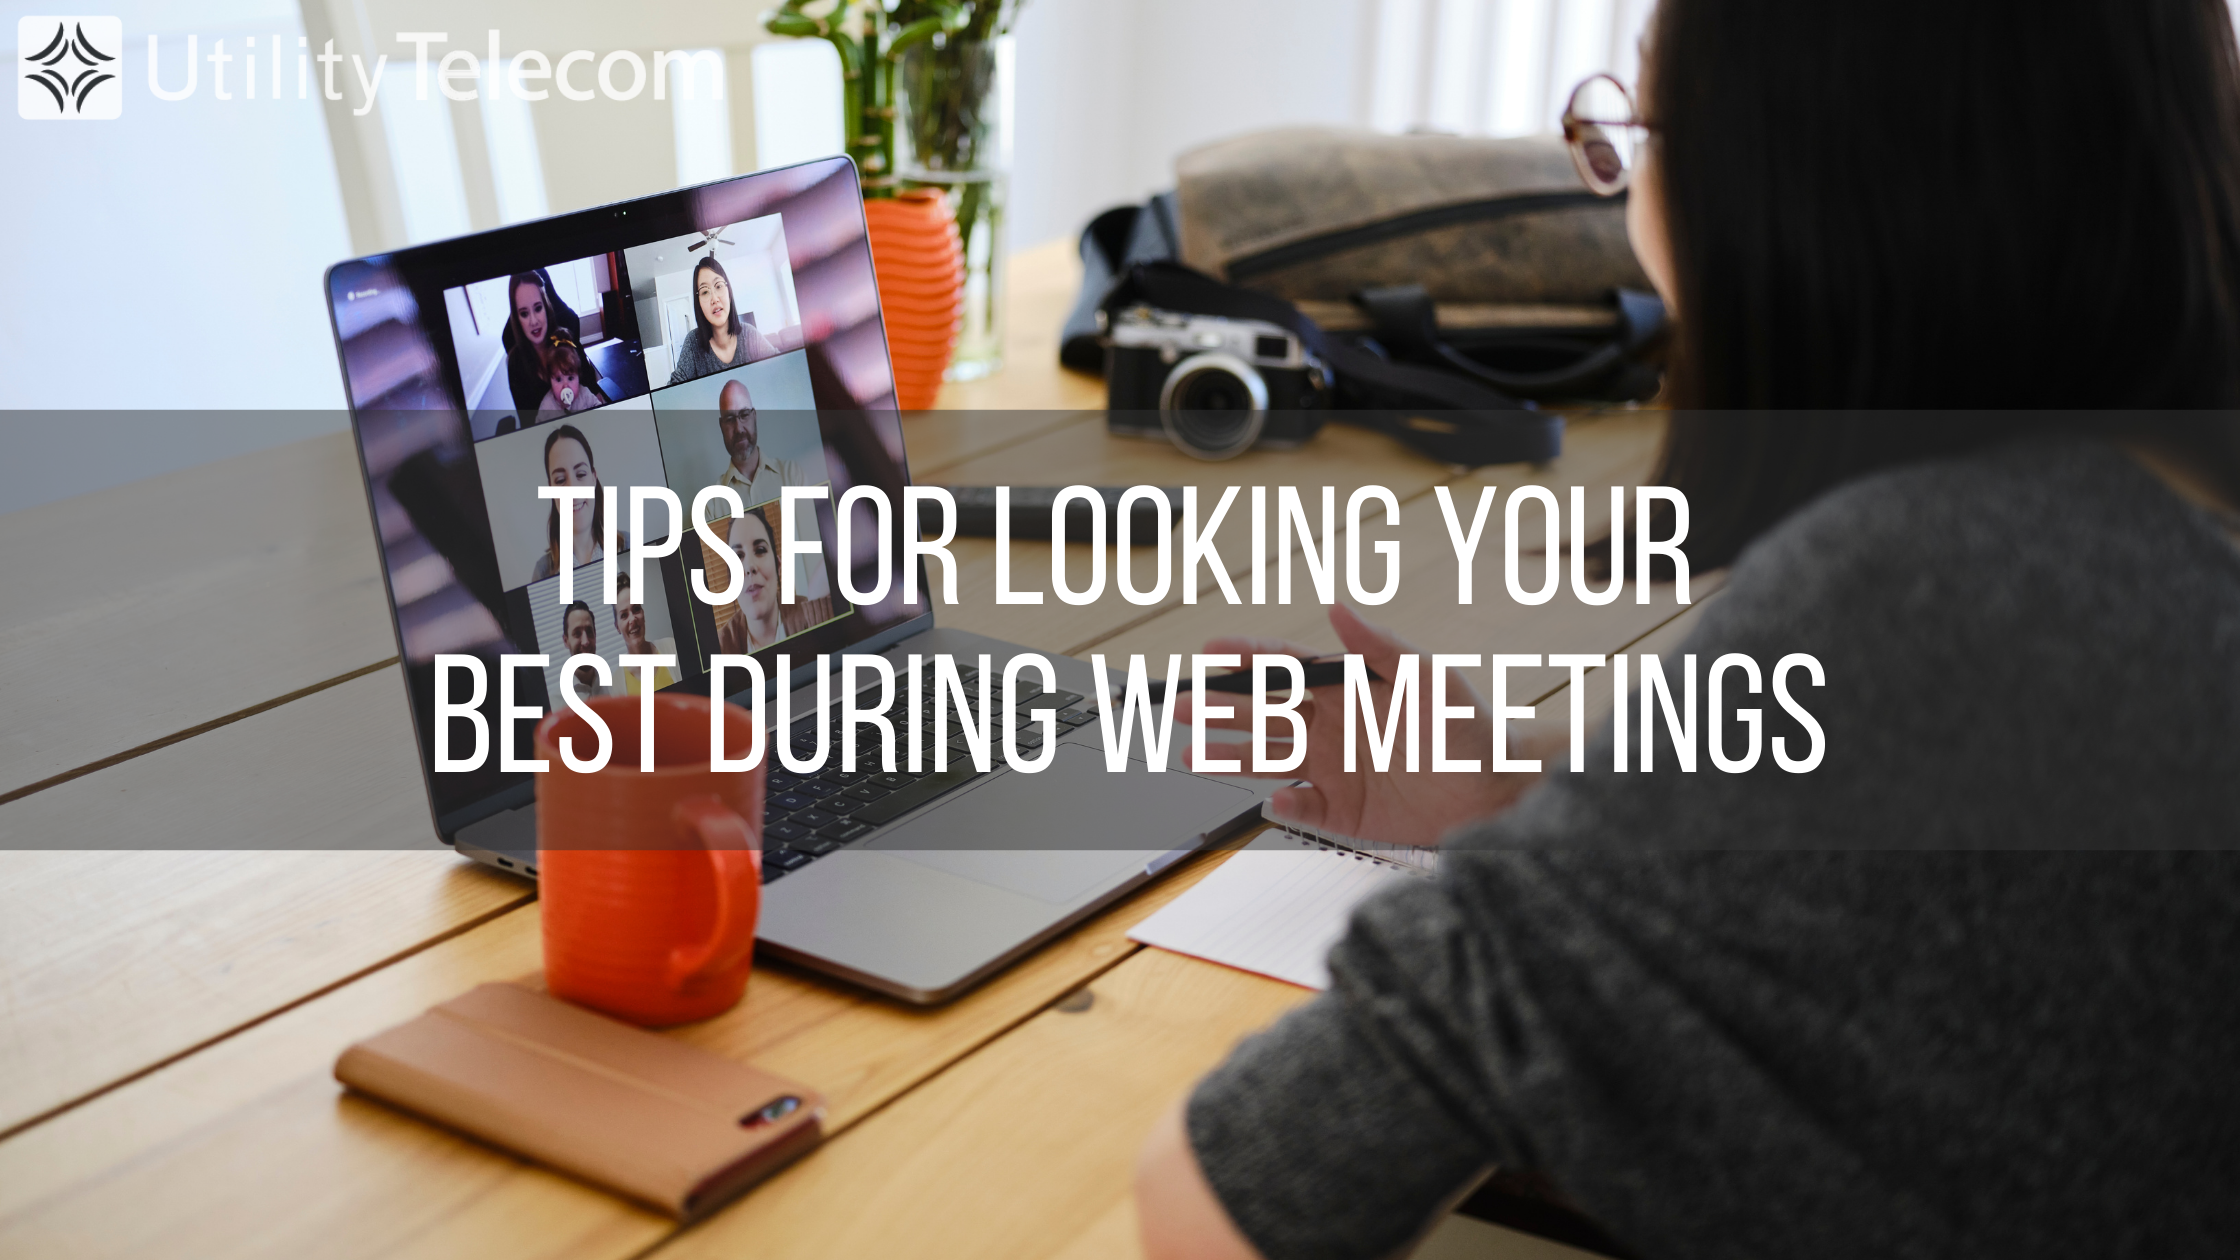 Woman looking at laptop during a web conference with a text overlay that reads "Tips for looking your best during web meetings"